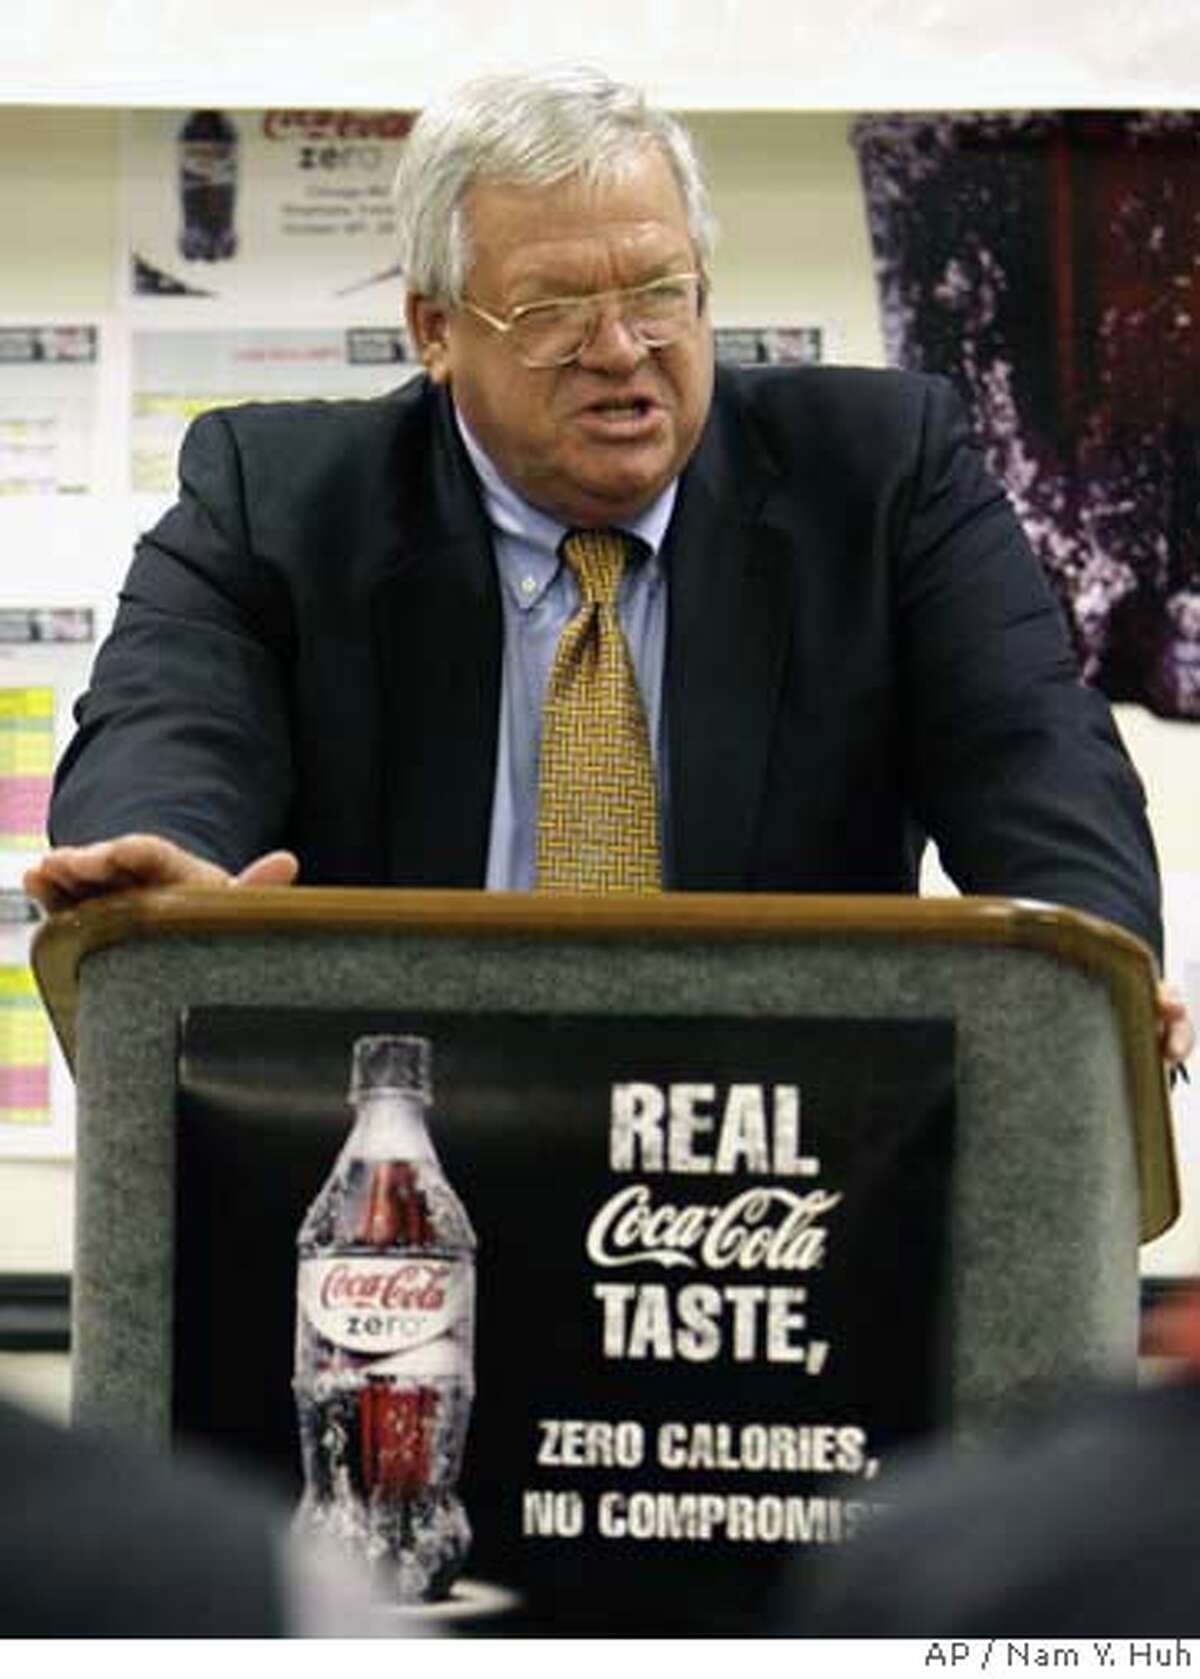 U.S. House Speaker Dennis Hastert, R-Ill., speaks to employees at the Coca-Cola Bottling Co. sales and distribution facility in St. Charles, Ill., Thursday, Nov. 2, 2006. (AP Photo/Nam Y. Huh)